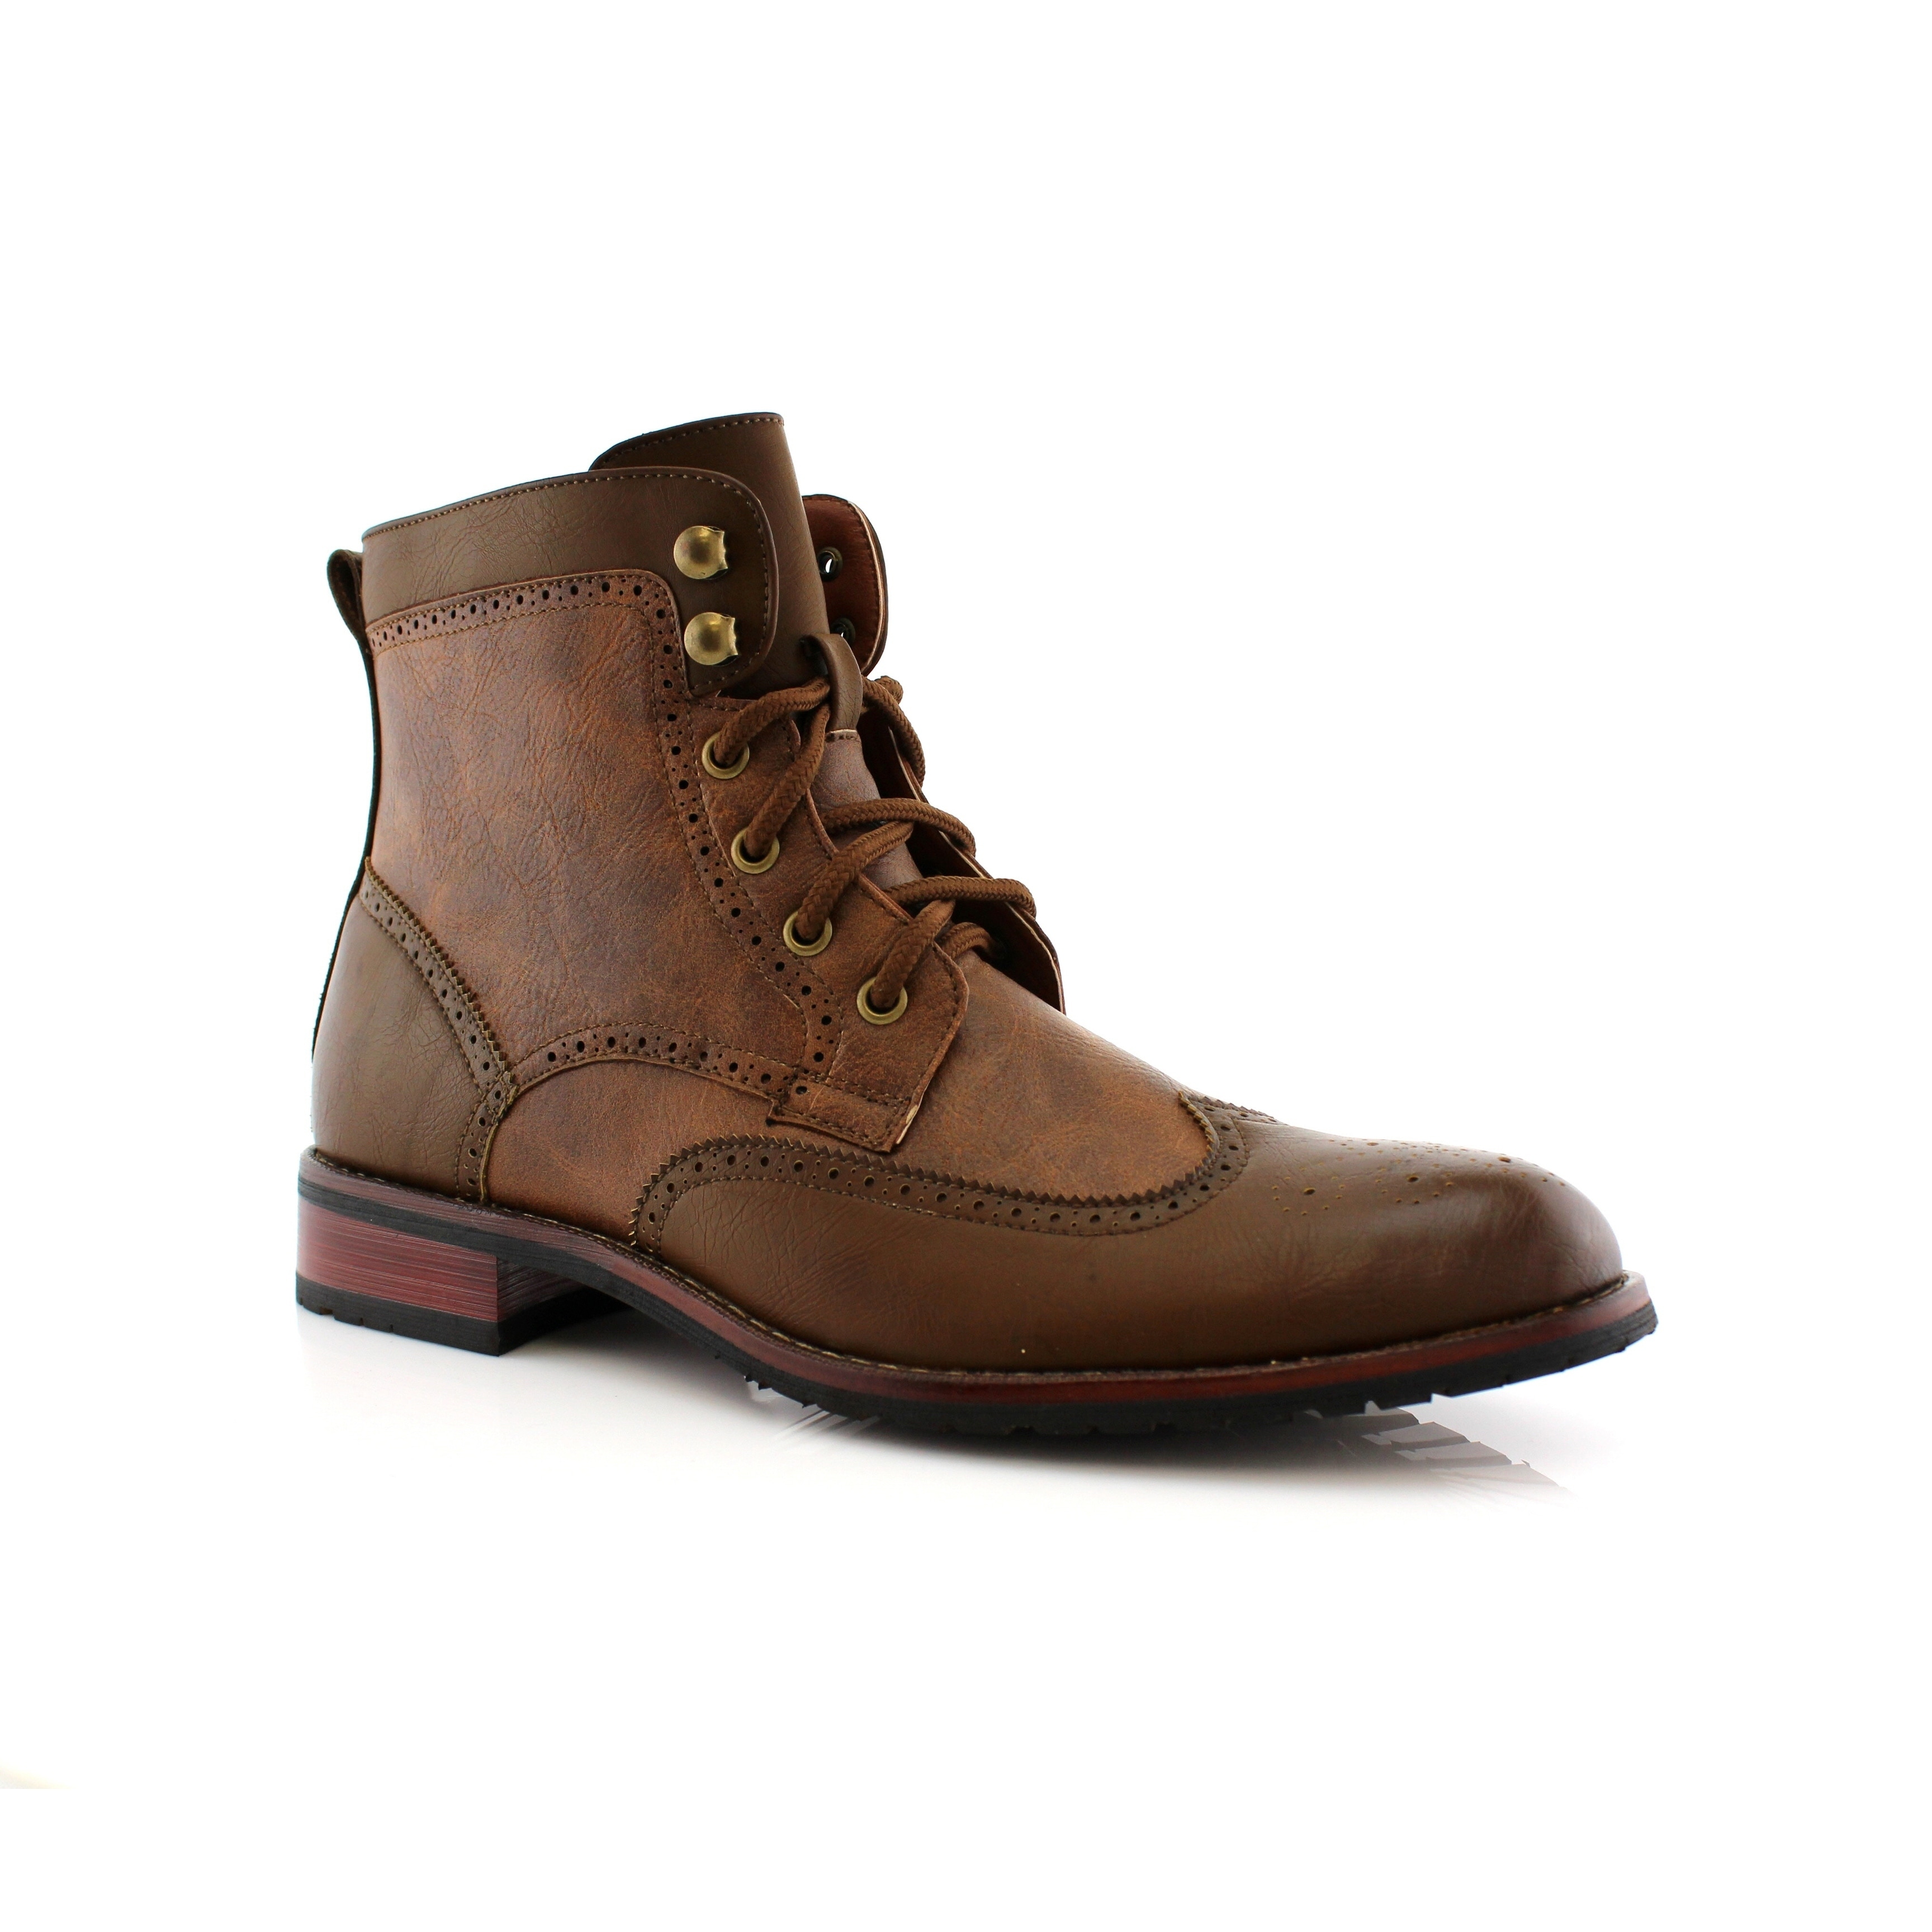 men's ankle boots with zipper